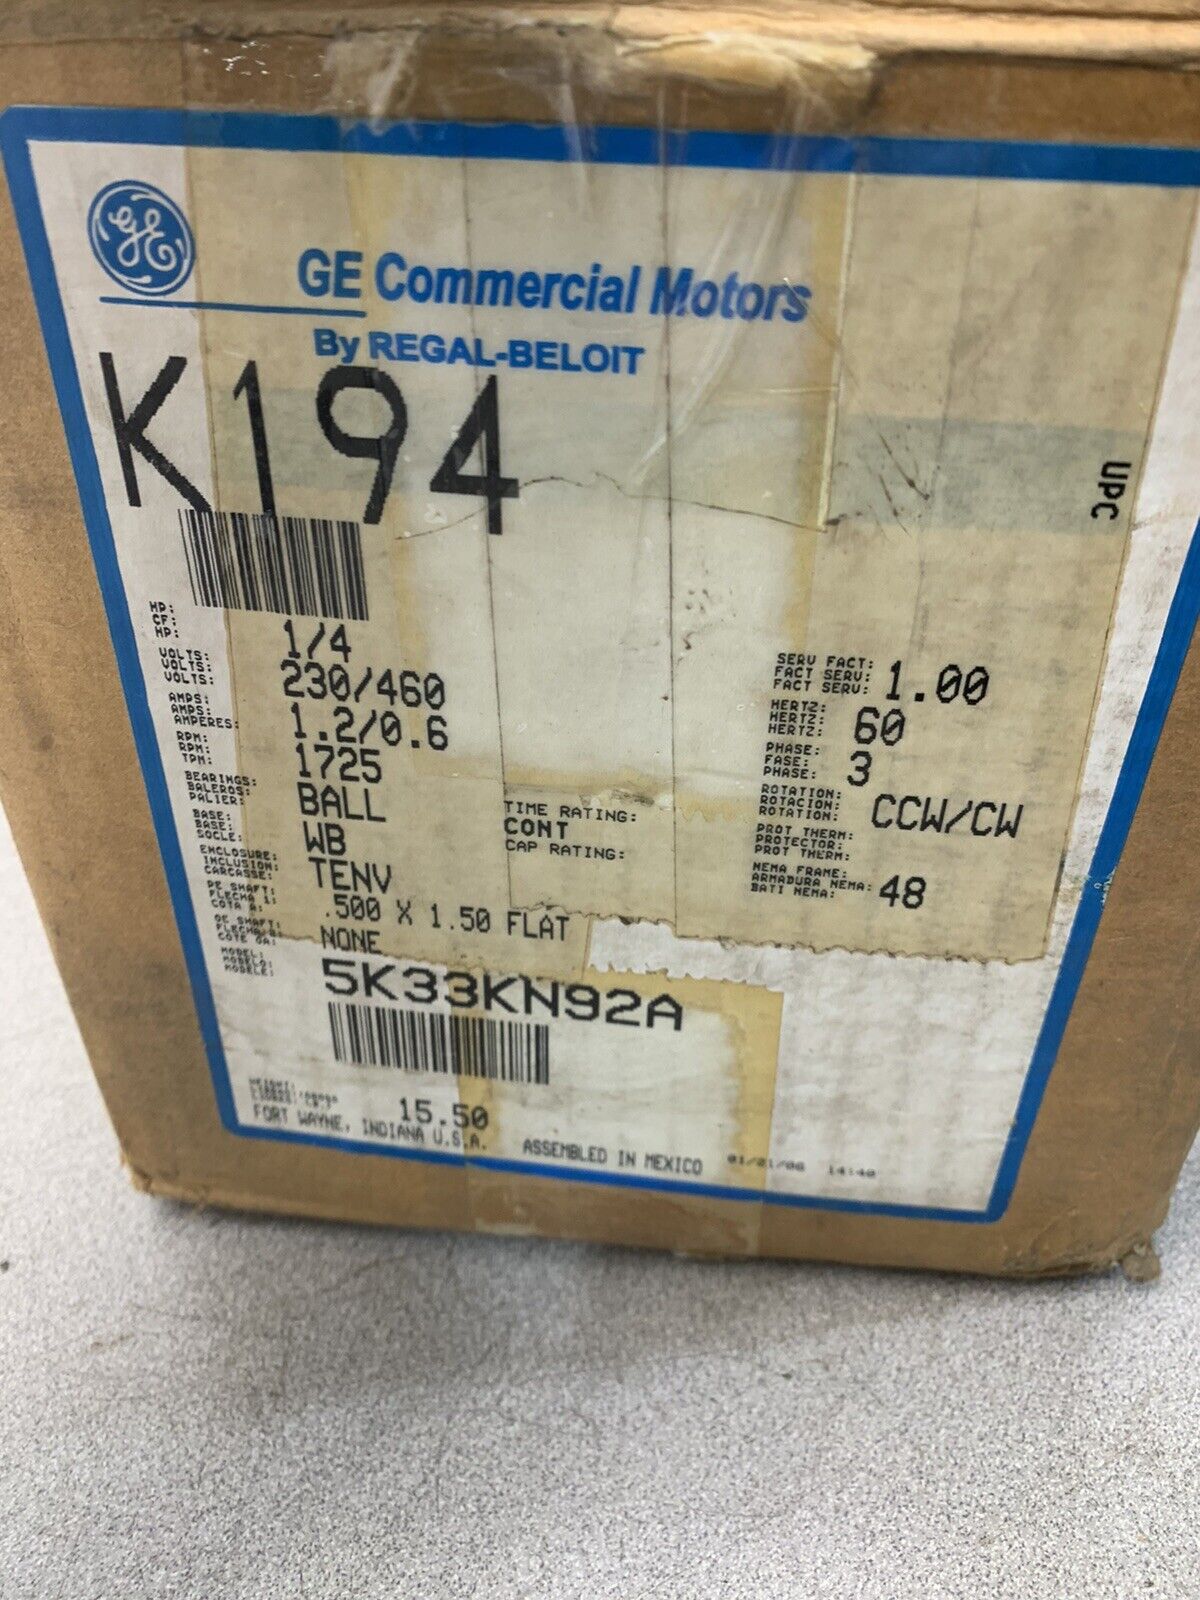 NEW GENERAL ELECTRIC K194 1/4HP 1725RPM ELECTRIC MOTOR 230/460V. 5K33KN92A